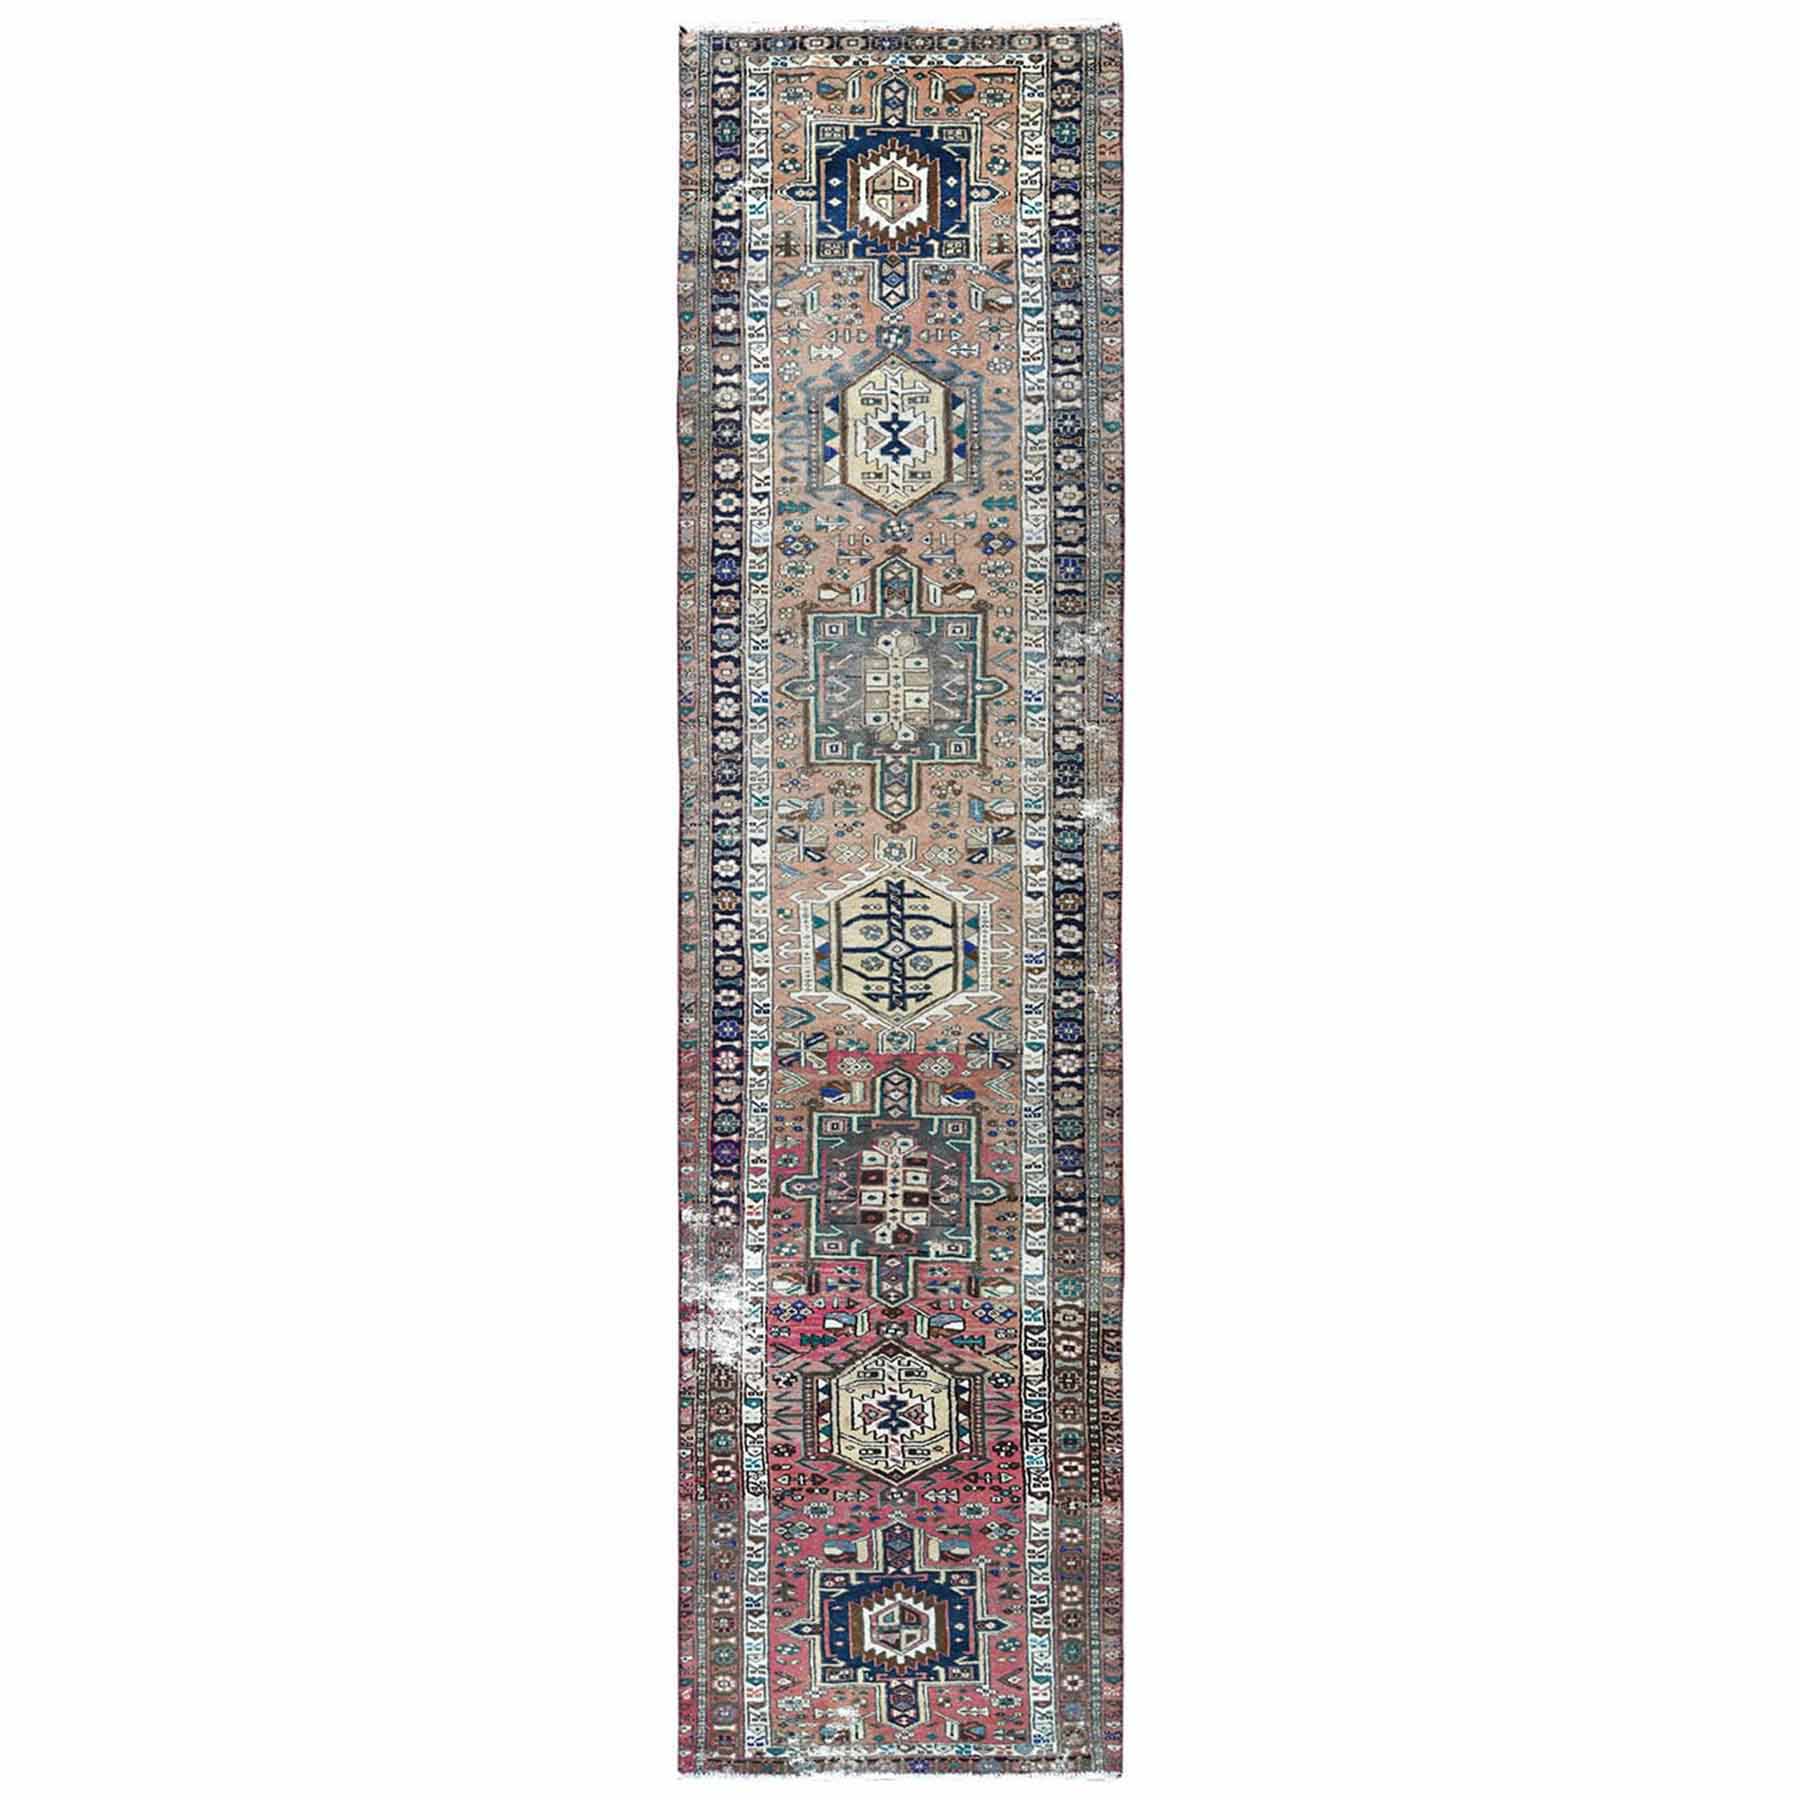 Overdyed-Vintage-Hand-Knotted-Rug-305040